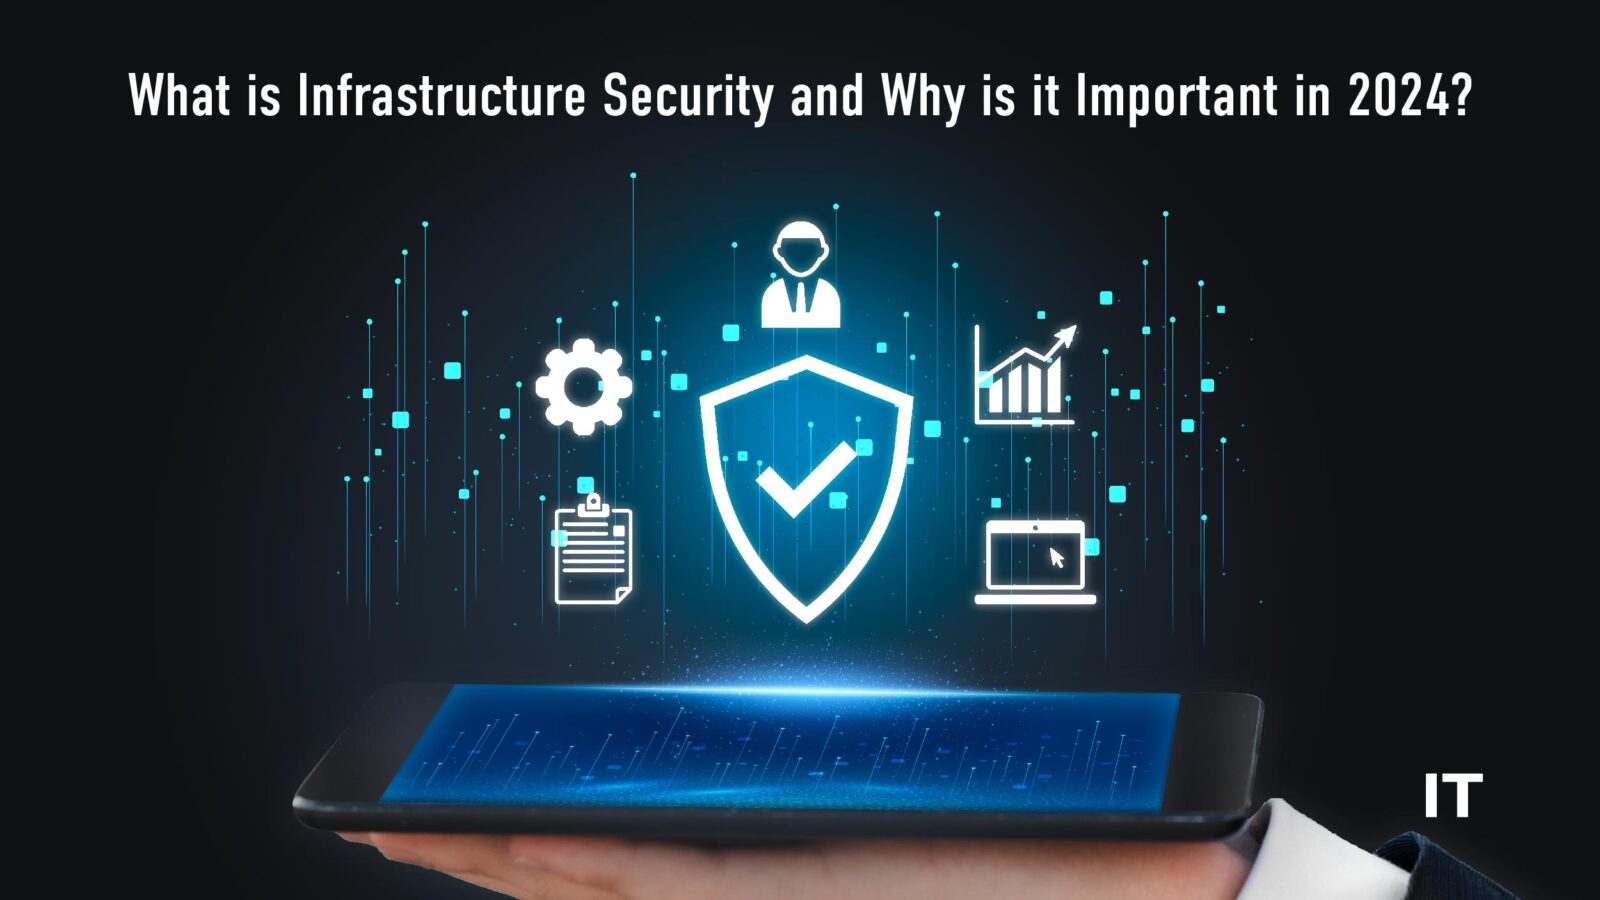 infrastructure security